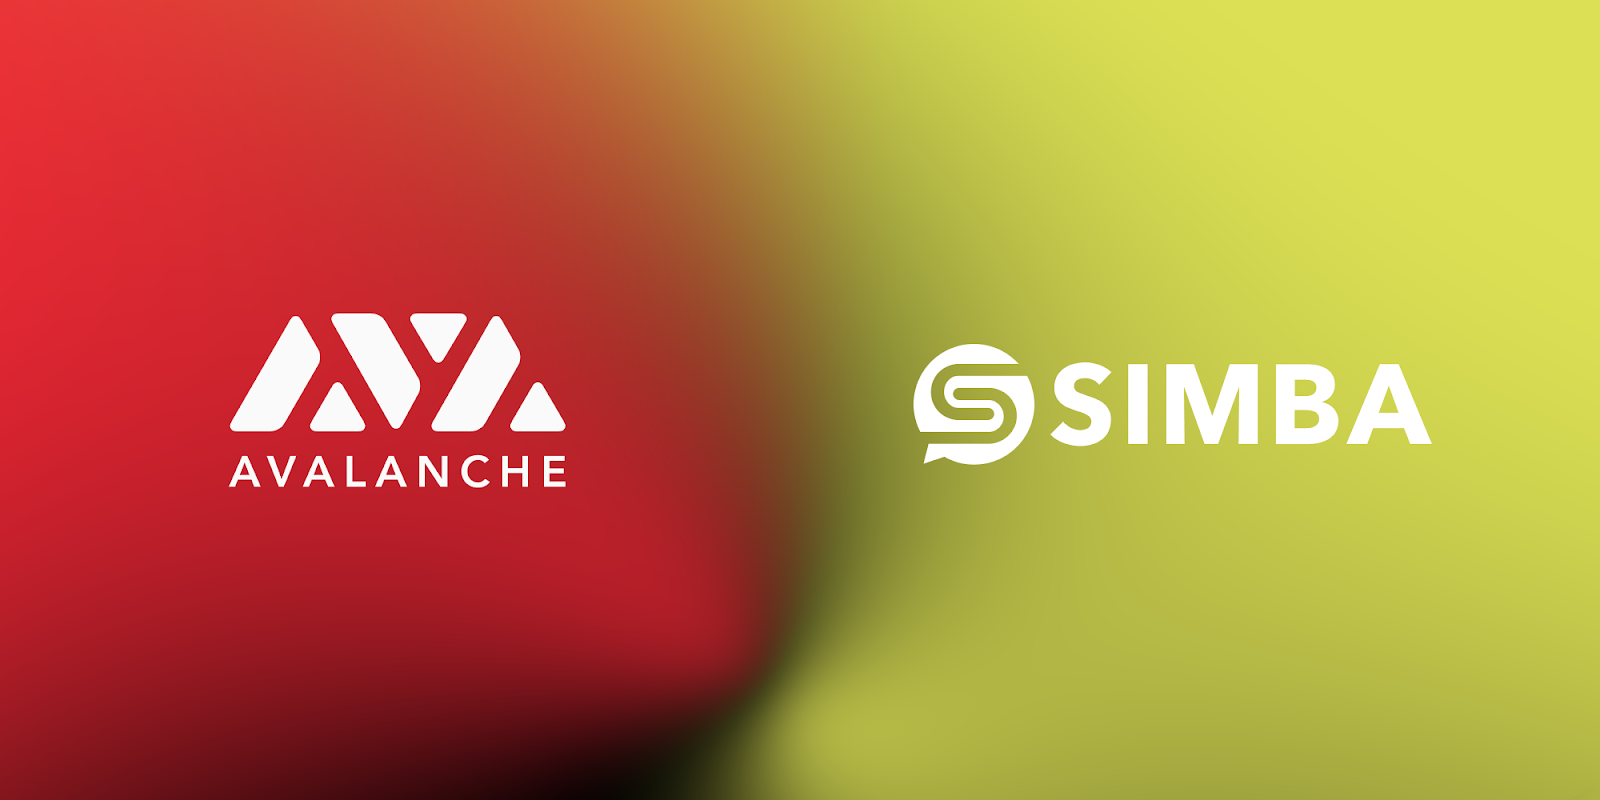 SIMBA Chain Expands to Avalanche, Enabling Low-Code Smart Contract Deployment on the Internet of Finance